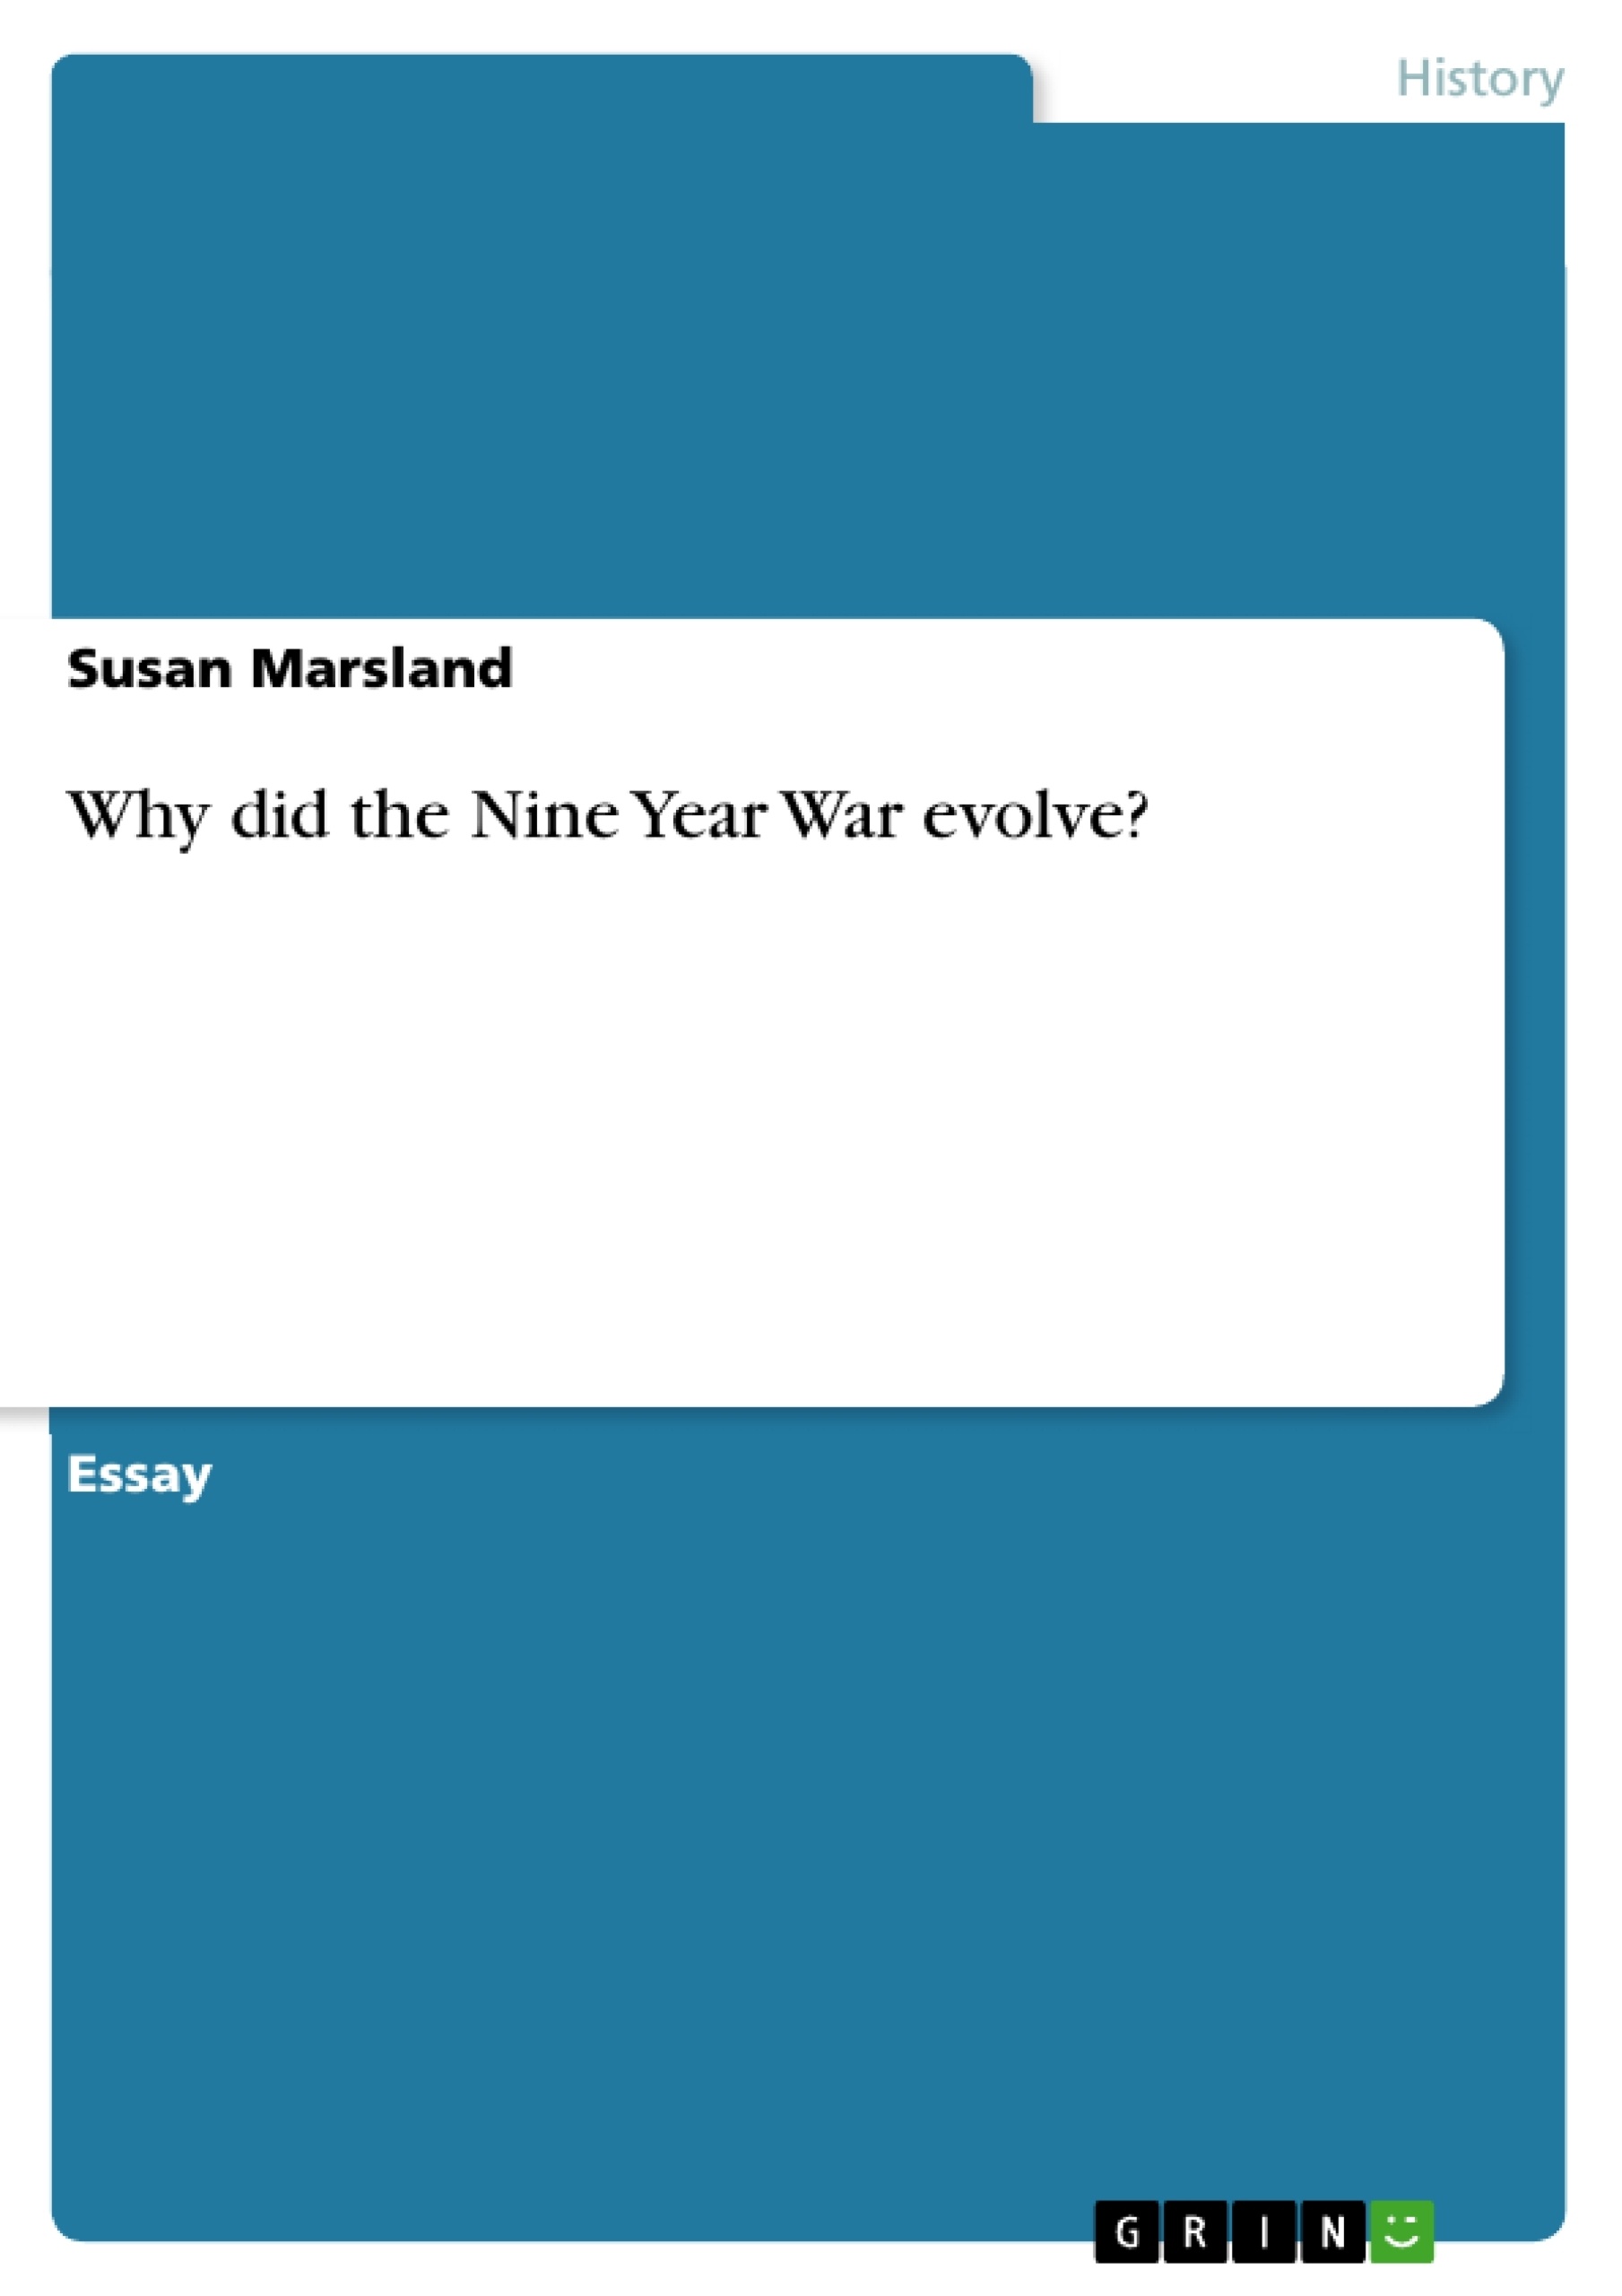 Title: Why did the Nine Year War evolve?